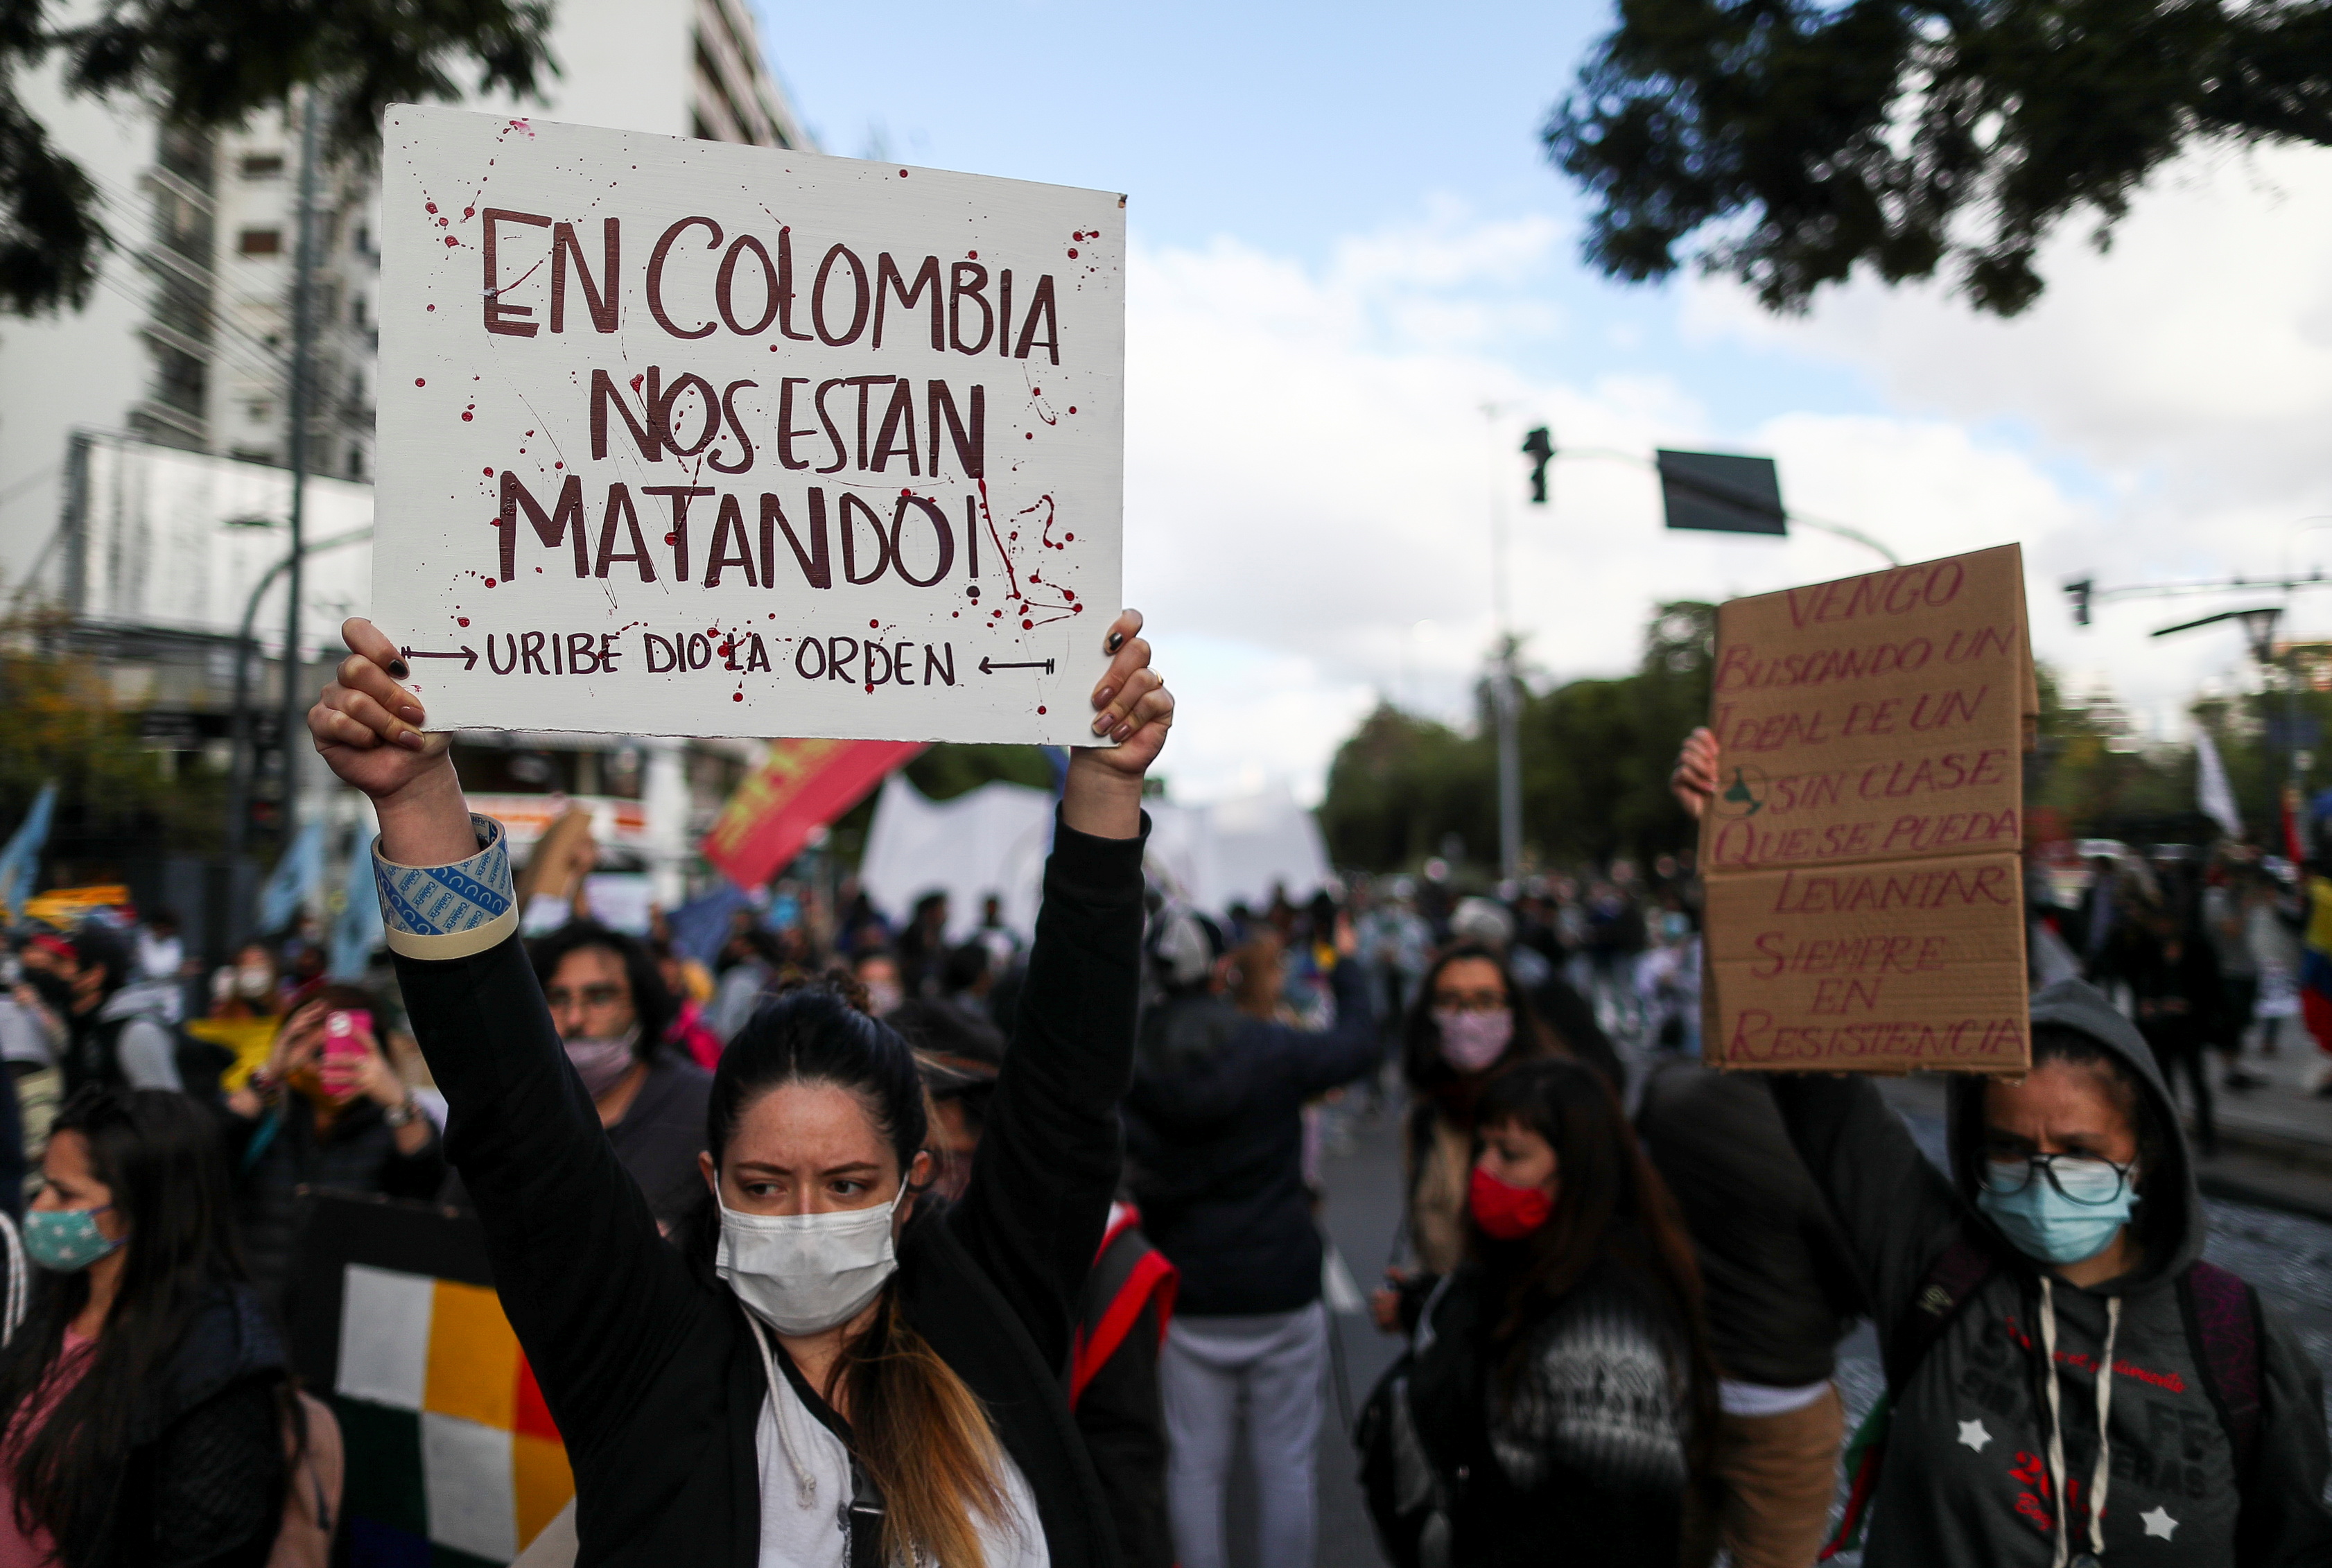 A demonstrator holds a placard that reads "In Colombia they are killing us", during a protest against what they say was police brutality exerted in recent protests in Colombia against President Ivan Duque's government's tax reform, outside the Colombian consulate in Buenos Aires, Argentina May 4, 2021. REUTERS/Agustin Marcarian